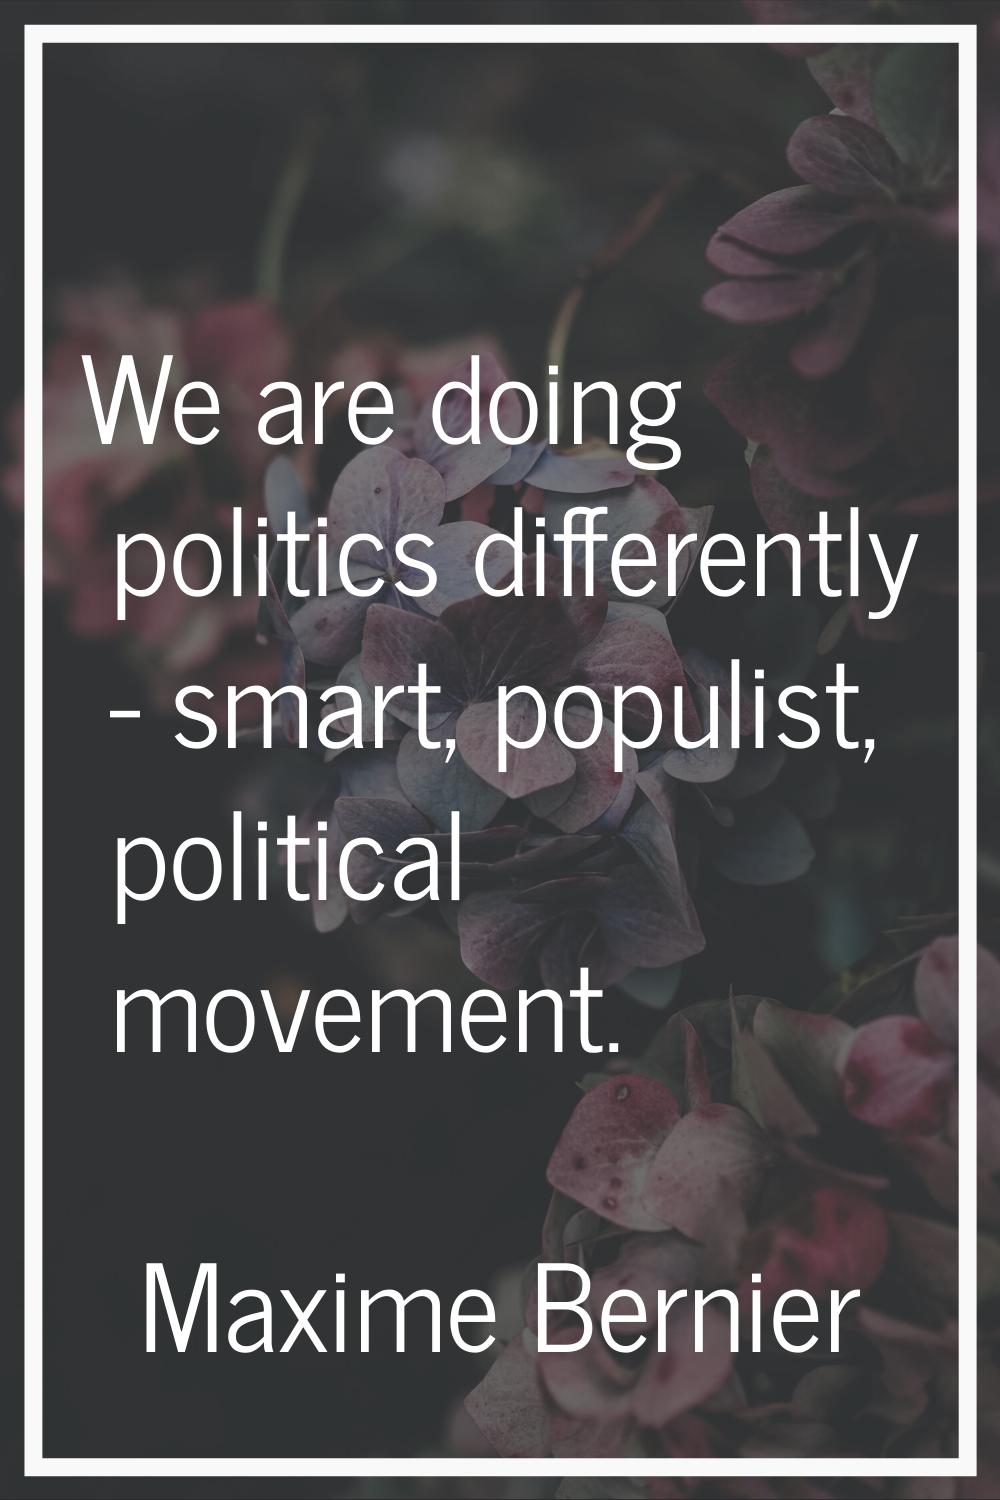 We are doing politics differently - smart, populist, political movement.